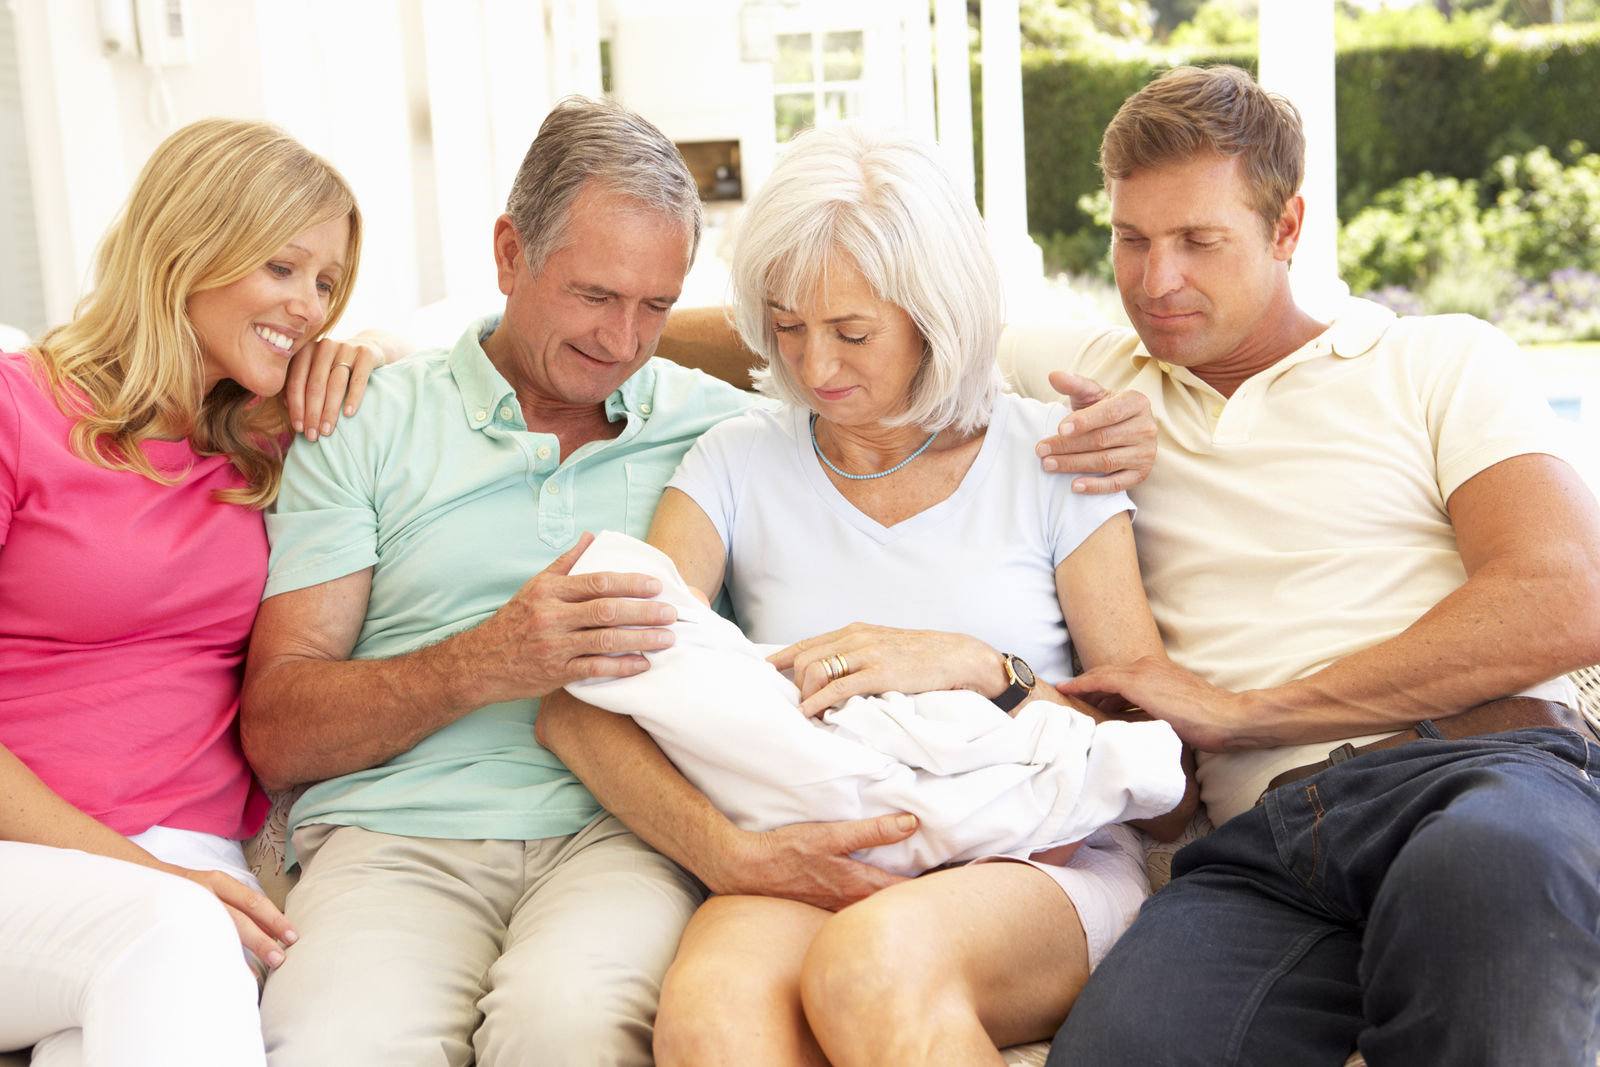 Can a grandparent get life insurance on a grandchild?